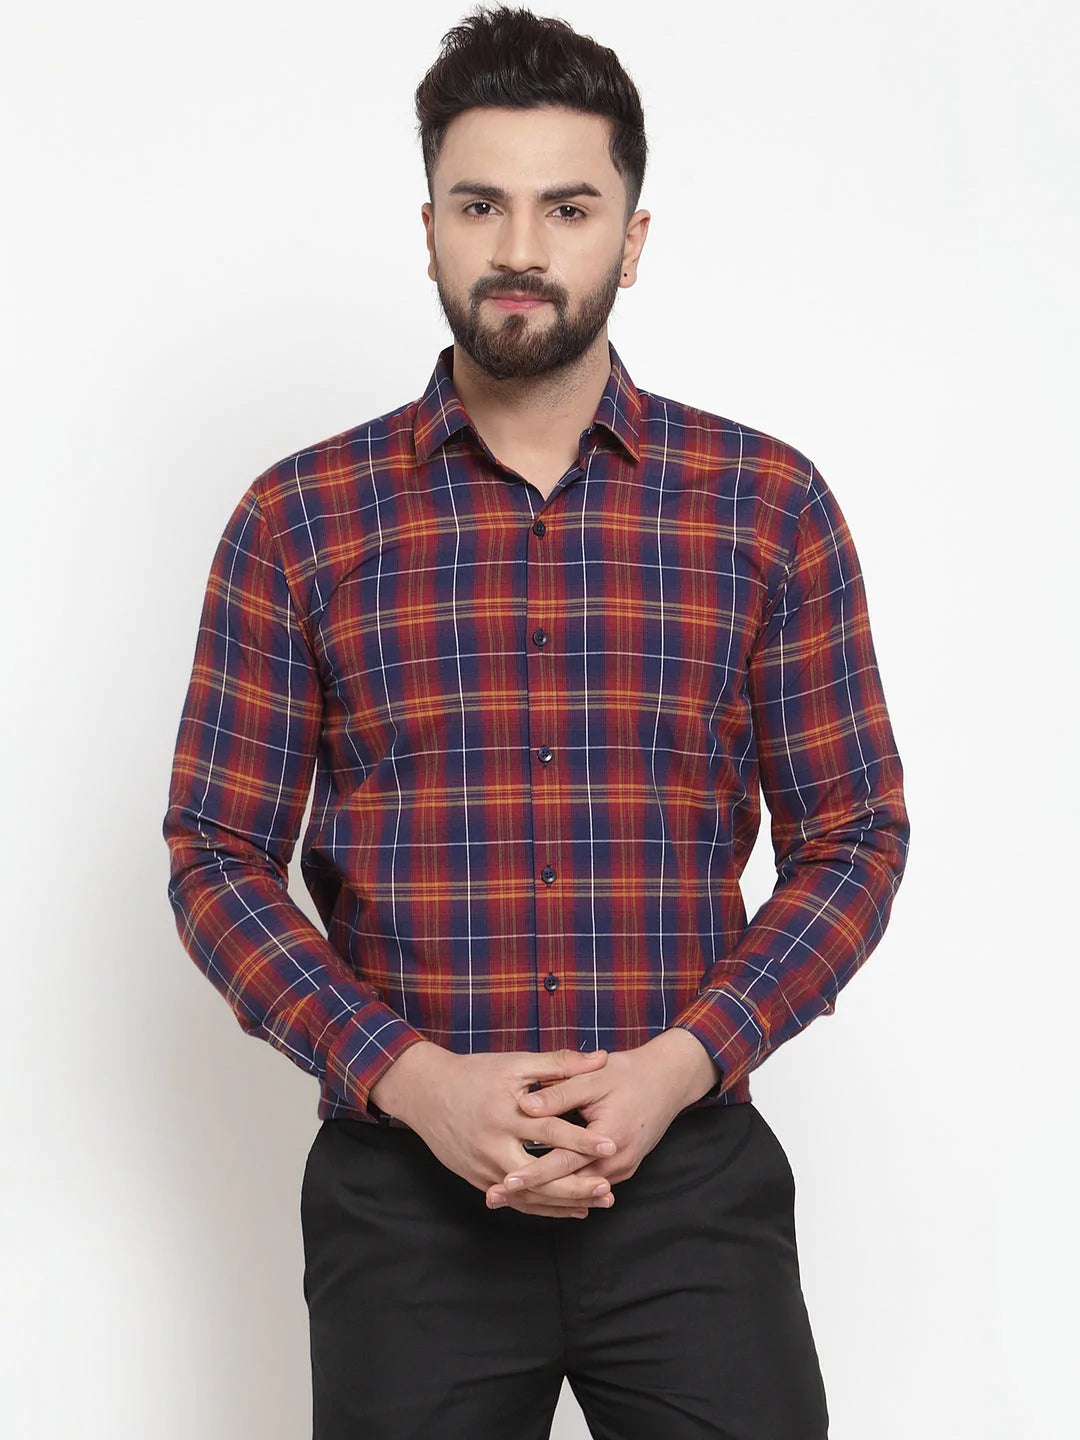 Jainish Multi Men's Cotton Checked Formal Shirts ( SF 741Blue-Red )